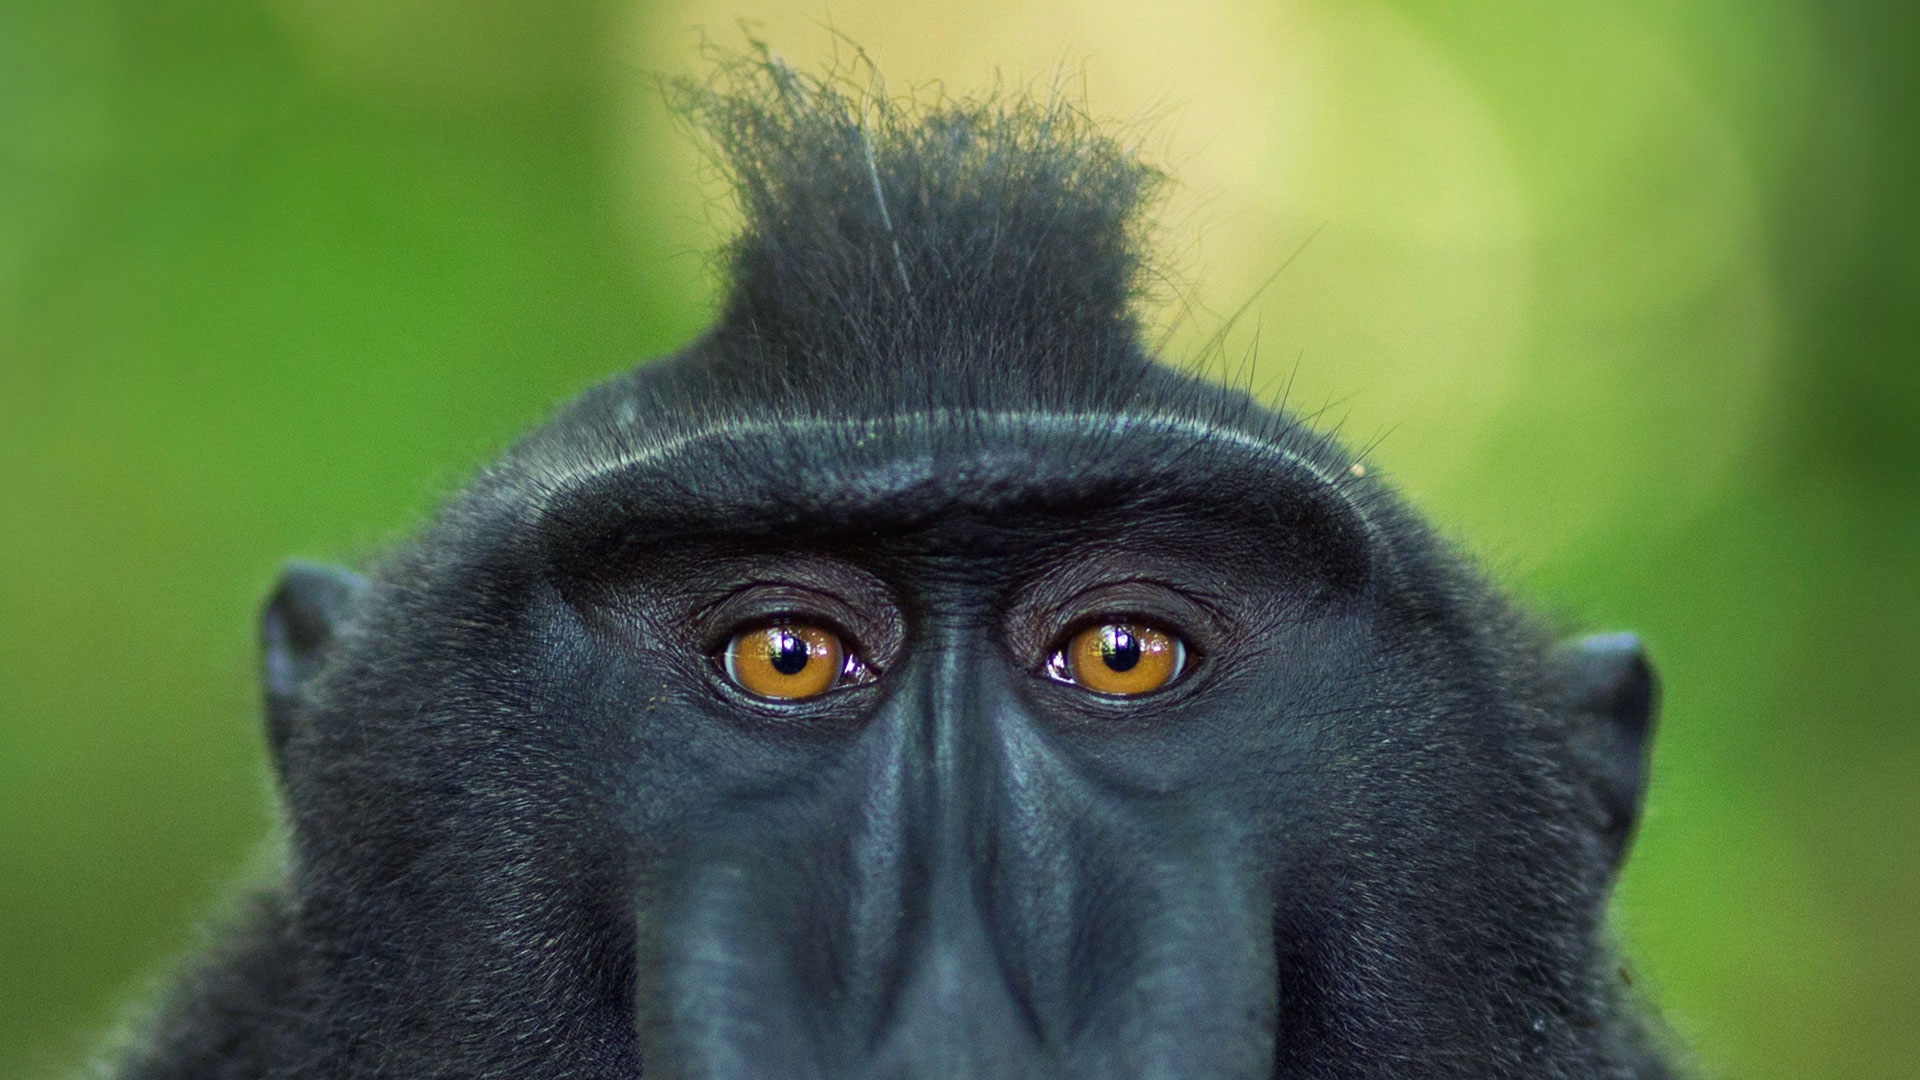 animal, crested black macaque, macaque, monkey, primate, stare